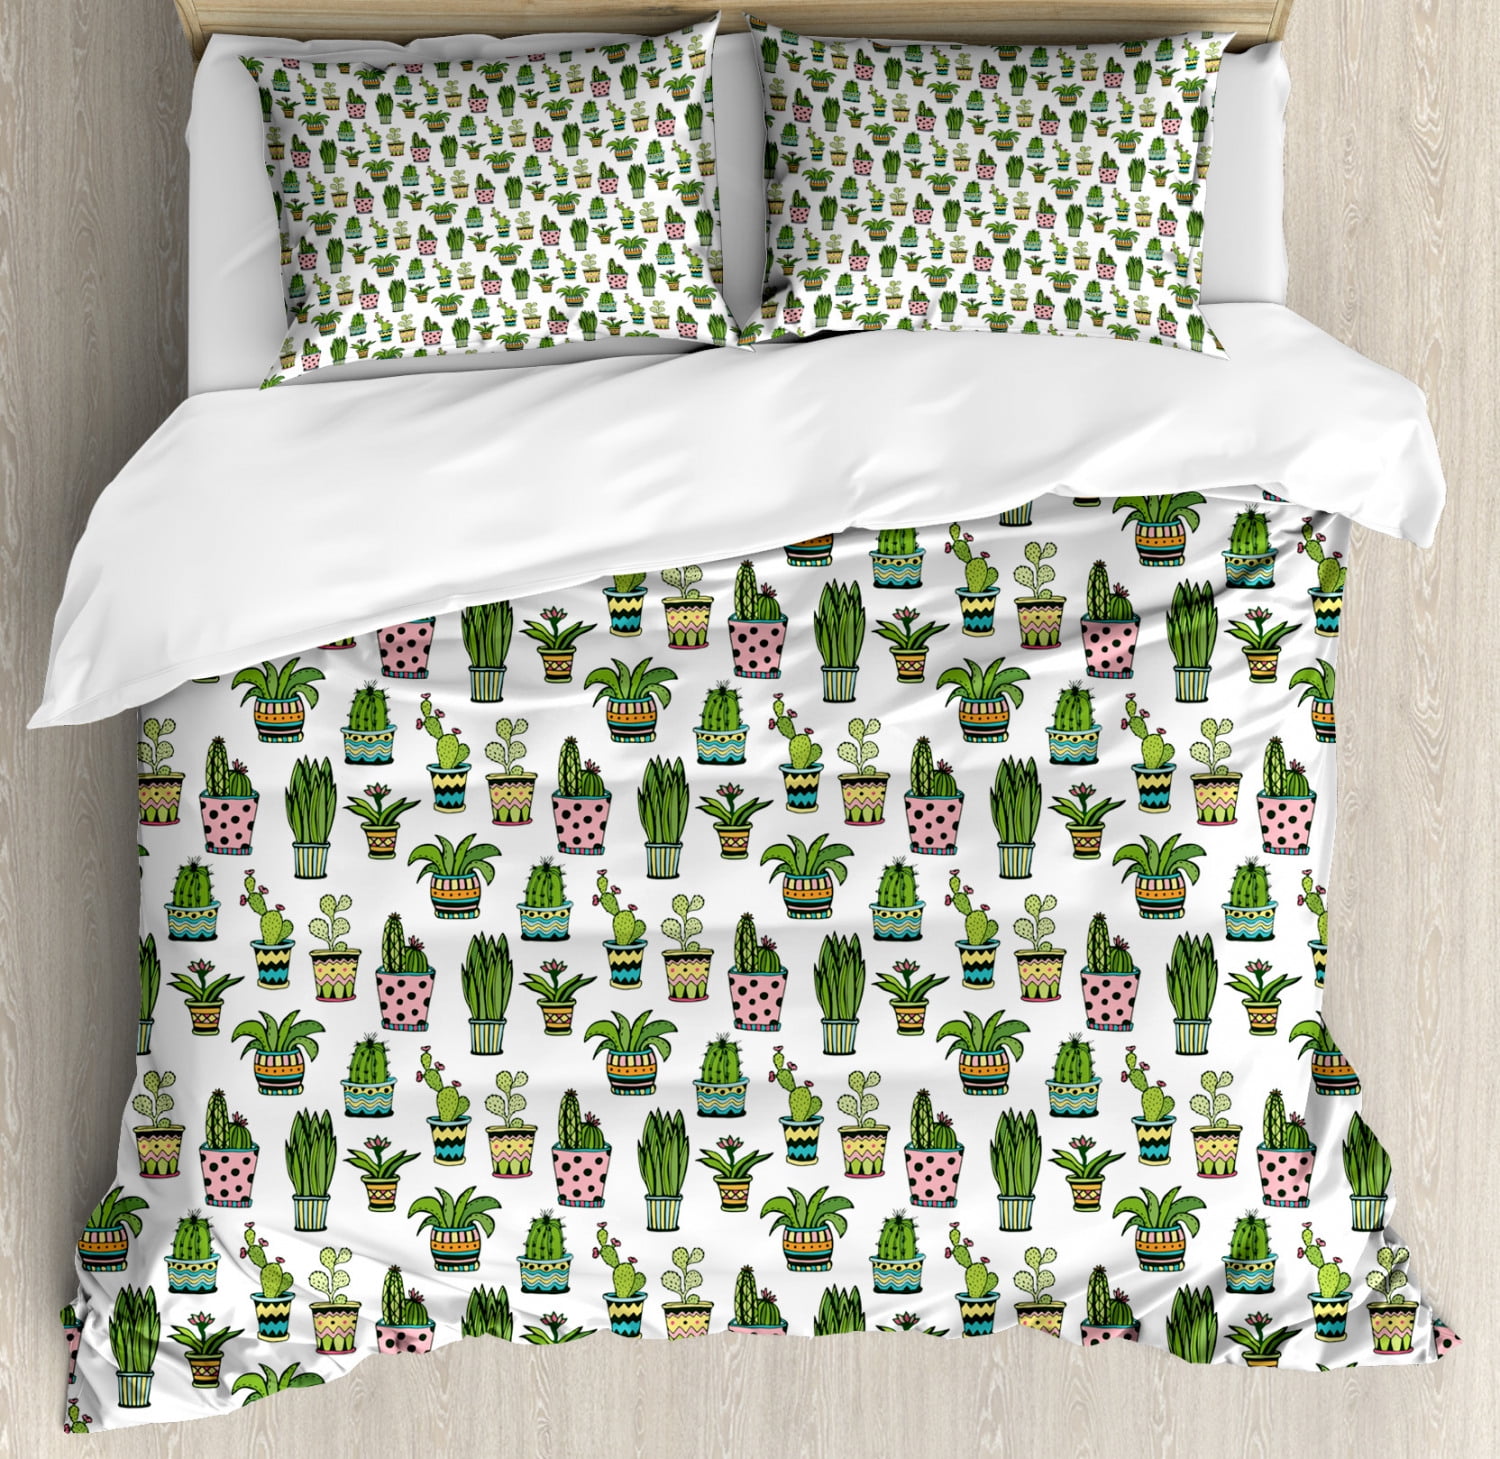 Ambesonne Cactus Duvet Cover Set Queen Size Decorative 3 Piece Bedding Set with 2 Pillow Shams Mint Green Spring Garden with Boho Style Bouquet of Thorny Plants Blossoms Arrows Feathers